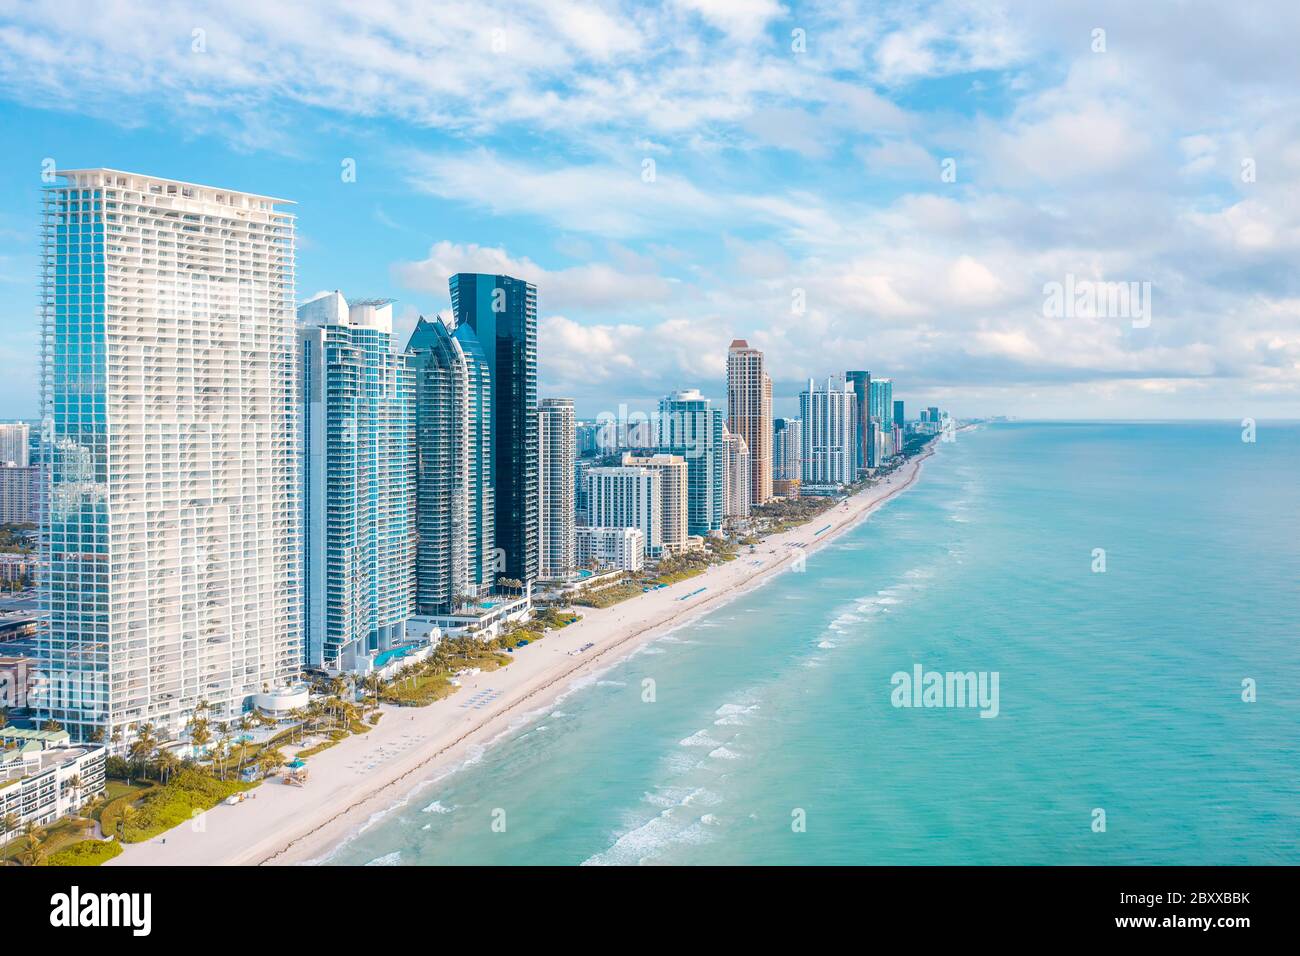 Sunny Isles Beach Skyline Banque D'Images